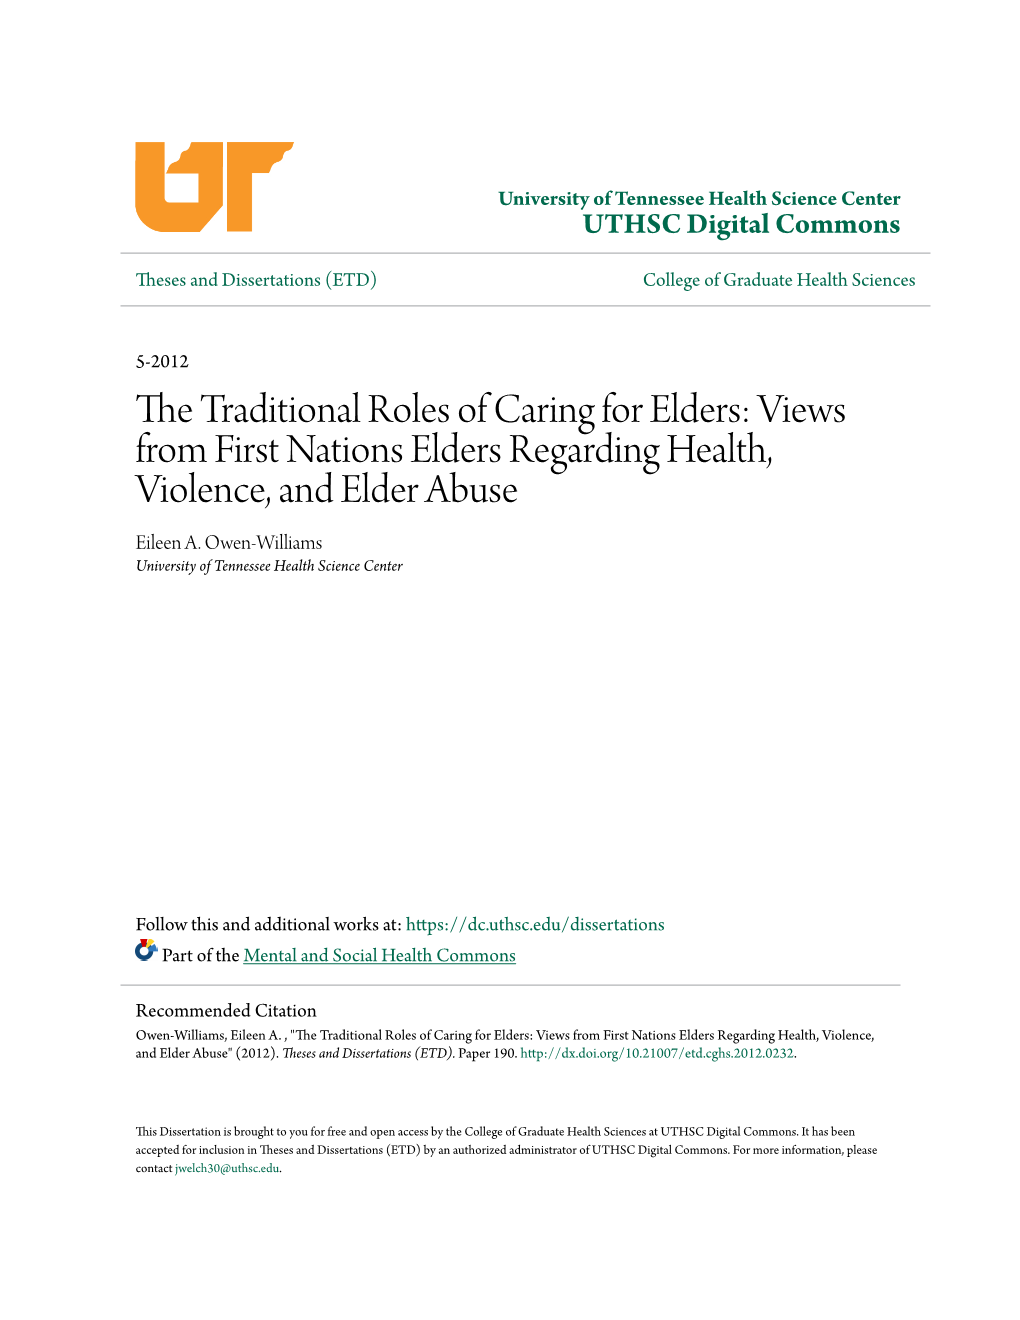 The Traditional Roles of Caring for Elders: Views from First Nations Elders Regarding Health, Violence, and Elder Abuse